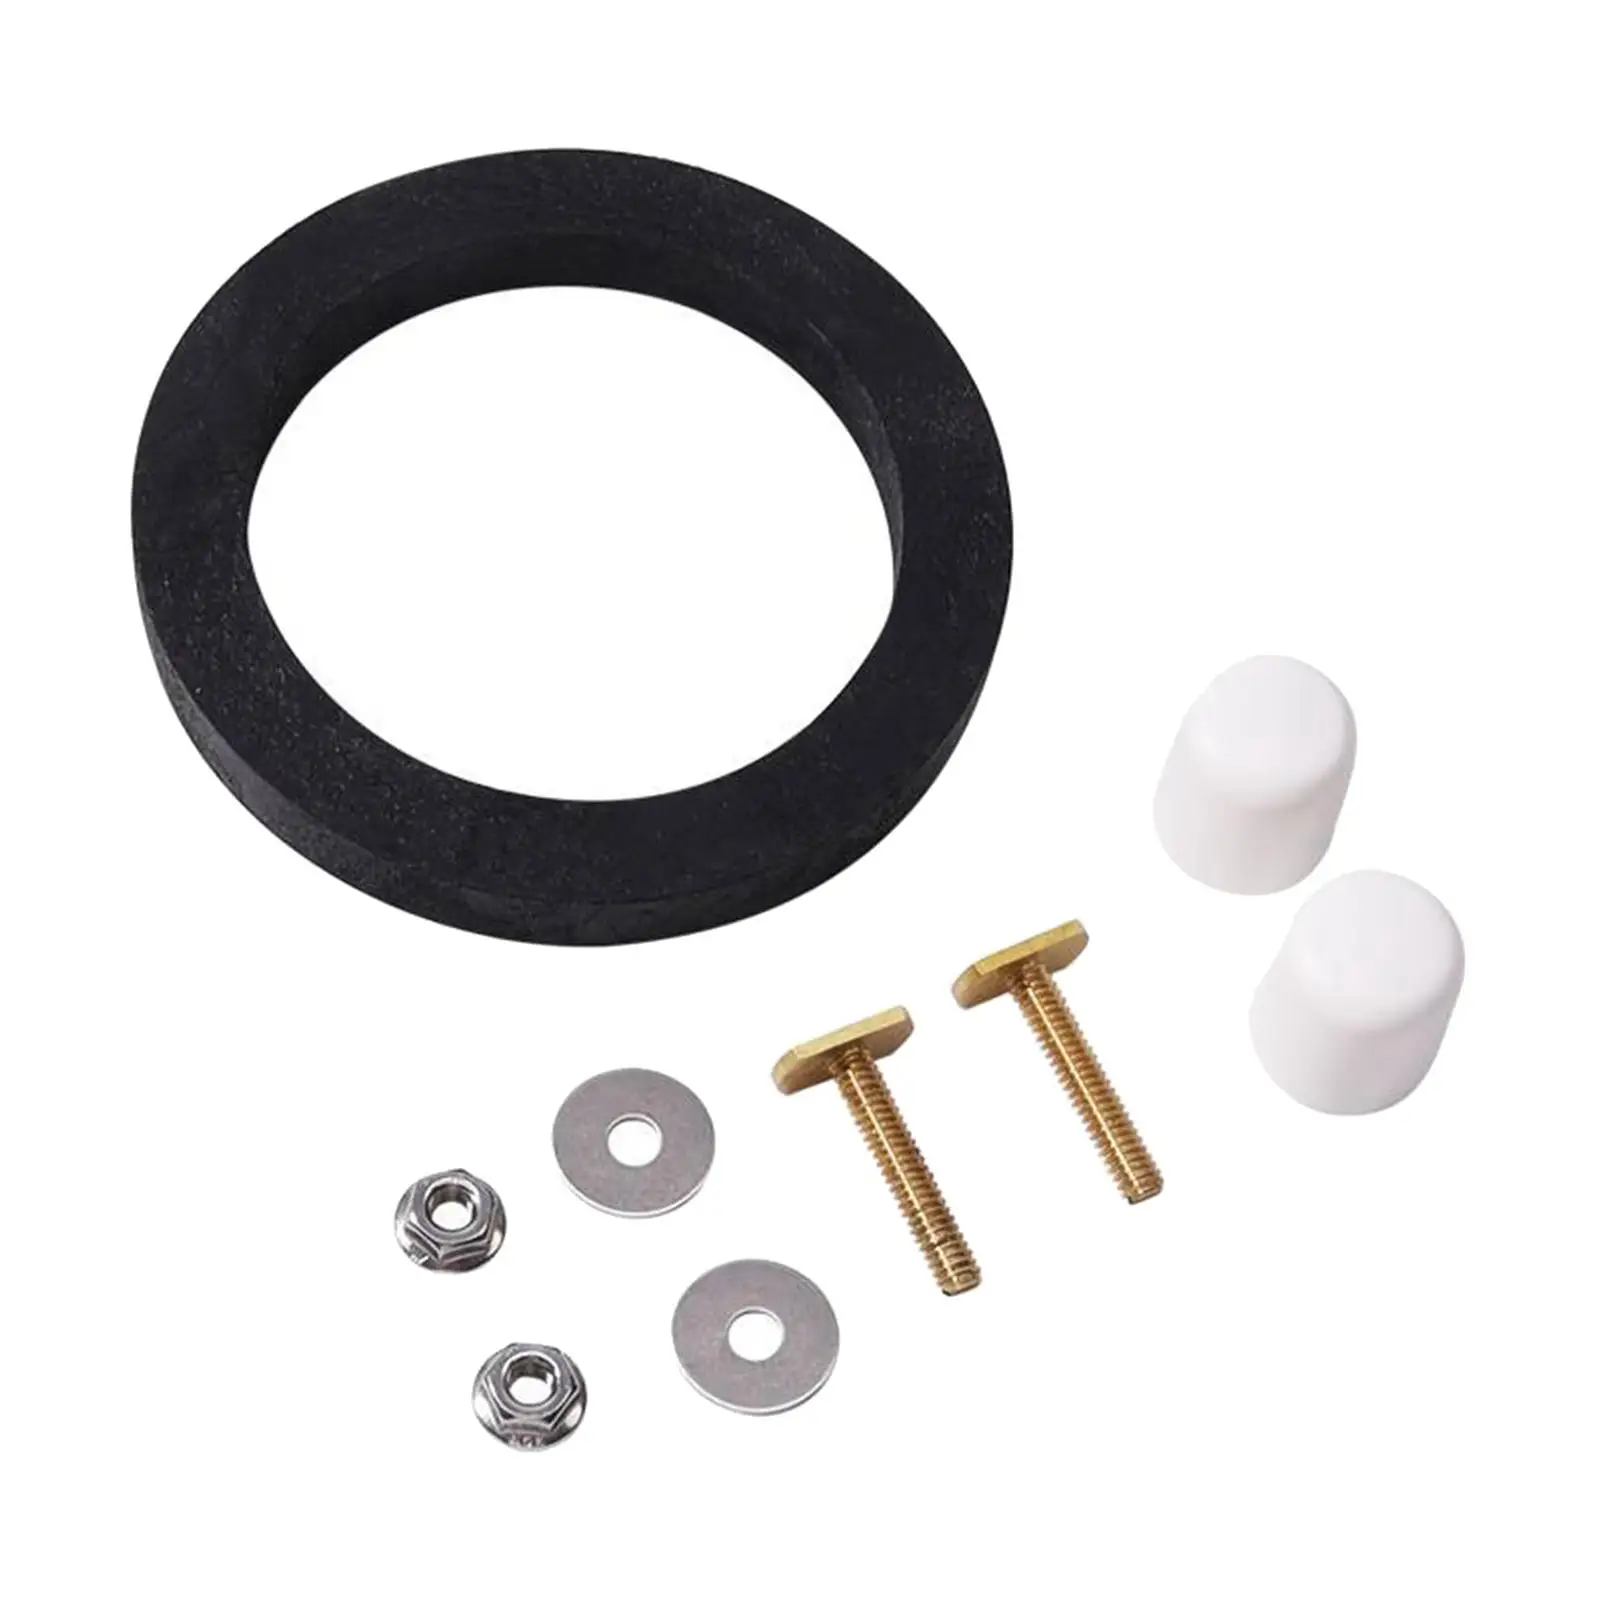 RV Toilet Seal Kit Mounting Hardware Gasket Replacement for Dometic 300 Series Professional Toilet Parts Easy Installation